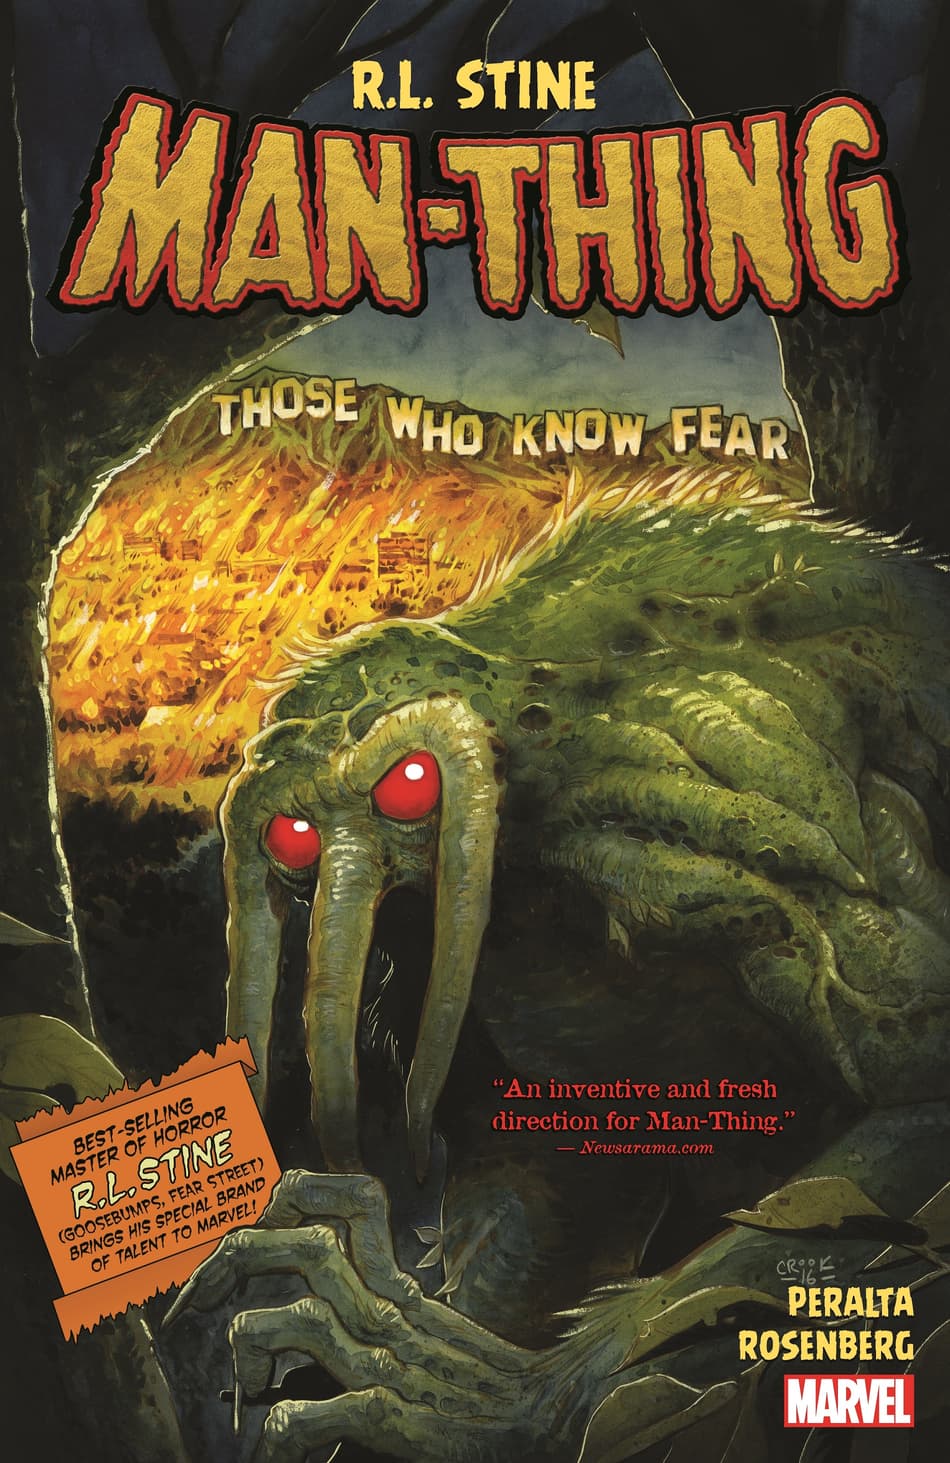 Cover to MAN-THING BY R.L. STINE.